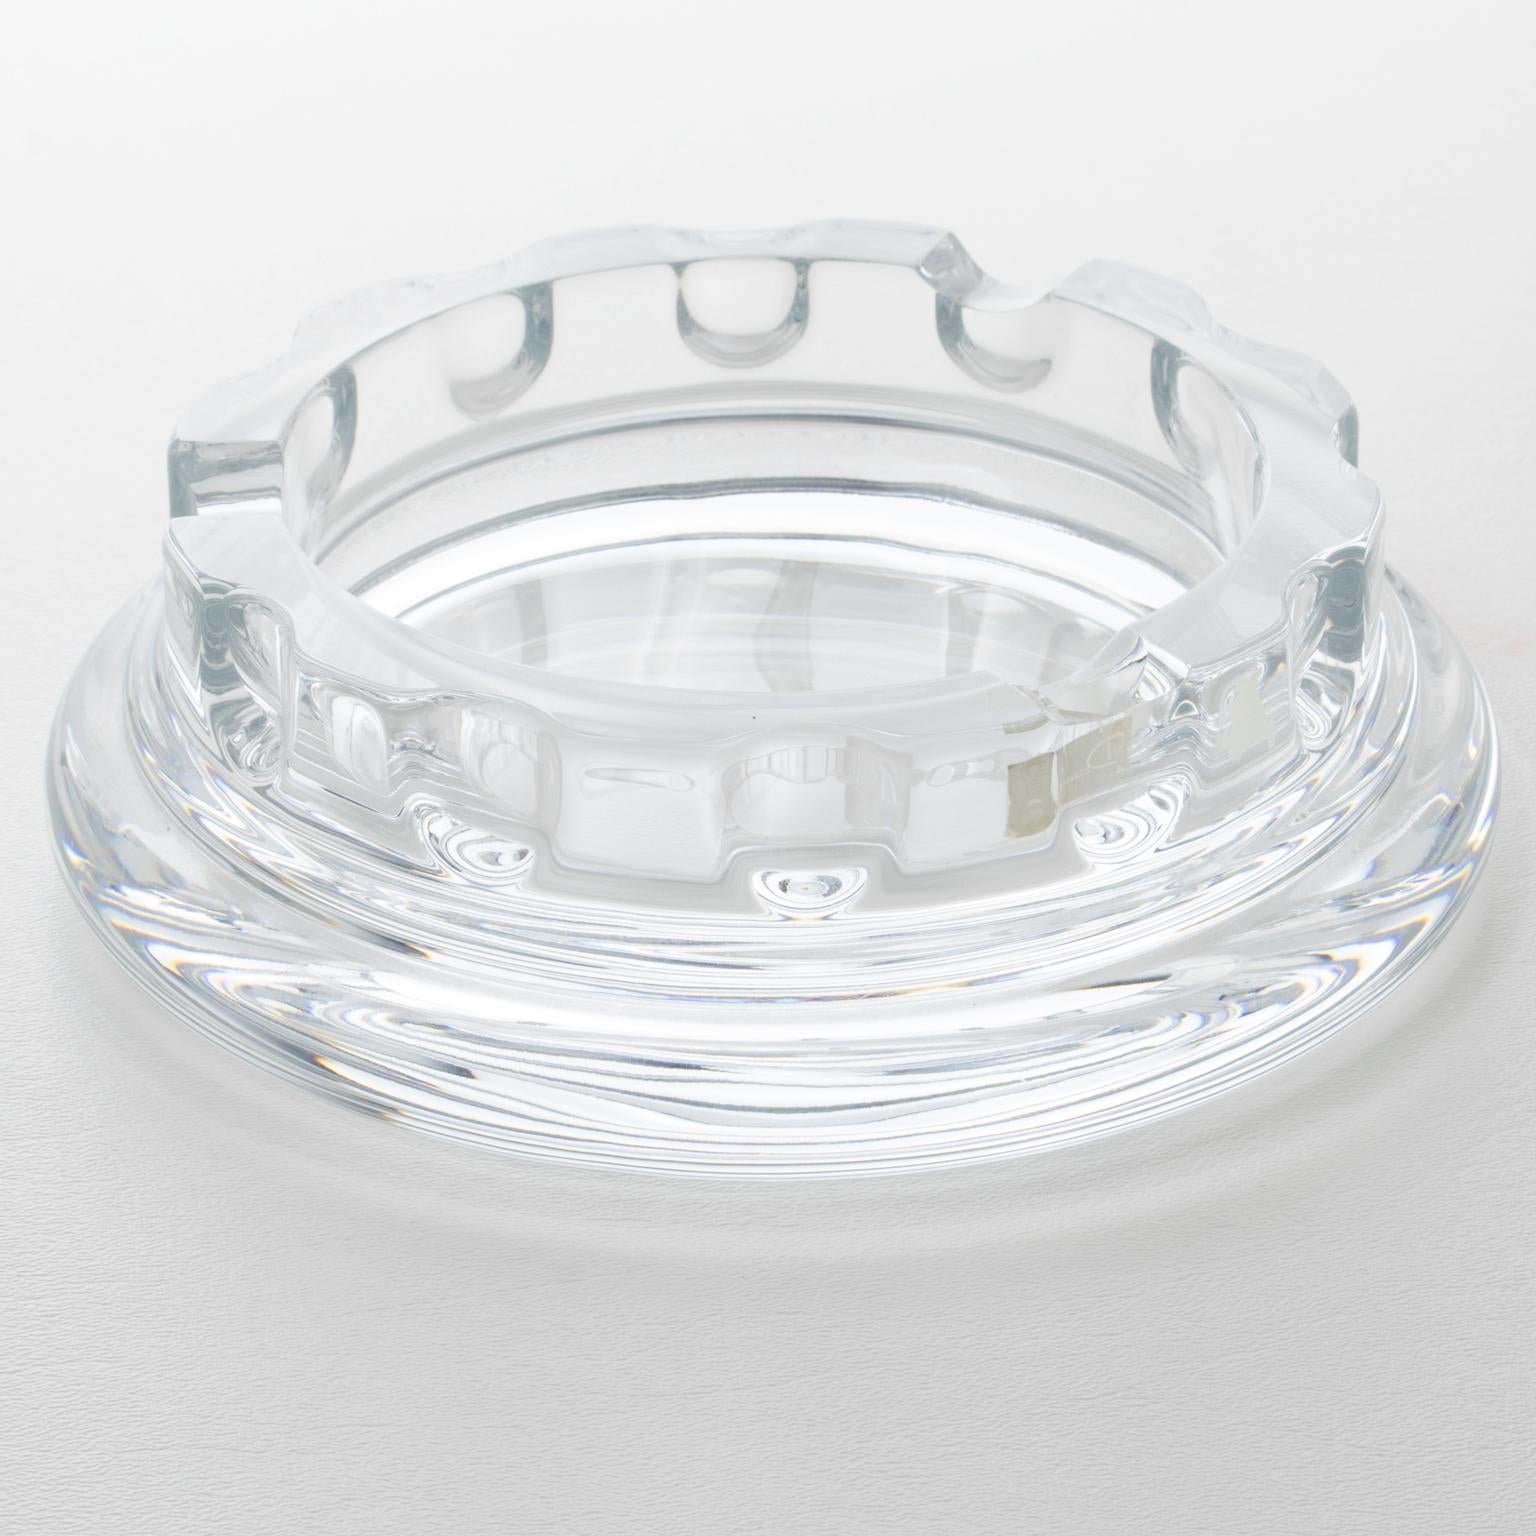 Late 20th Century Daum France Crystal Cigar Ashtray Decorative Bowl Vide Poche Catchall, 1970s For Sale